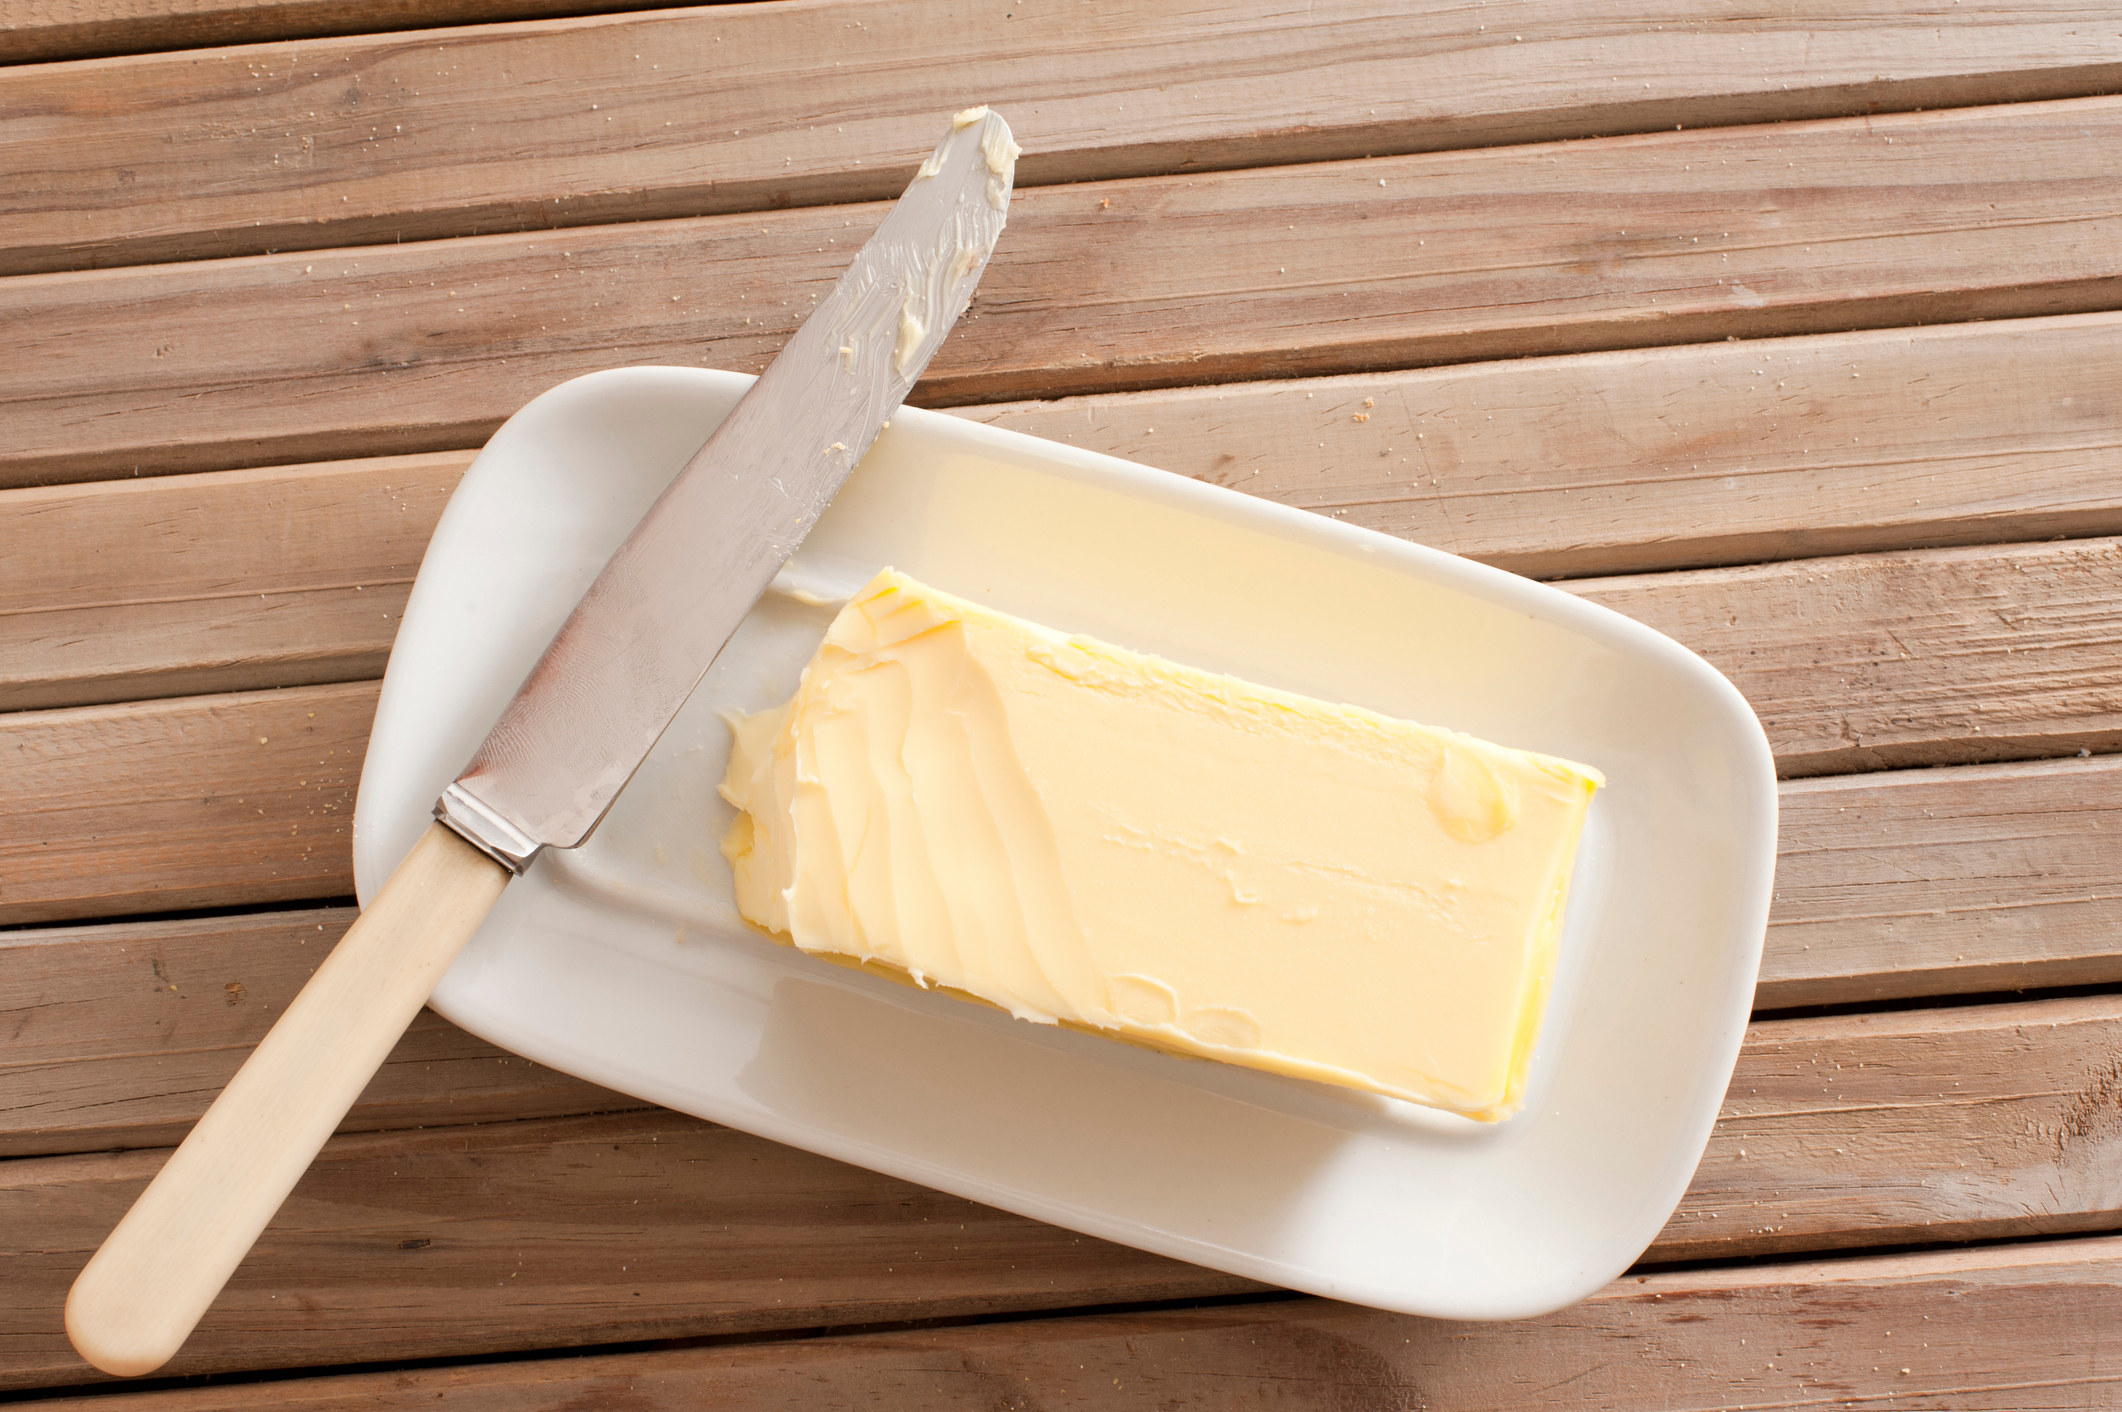 A butter knife and butter